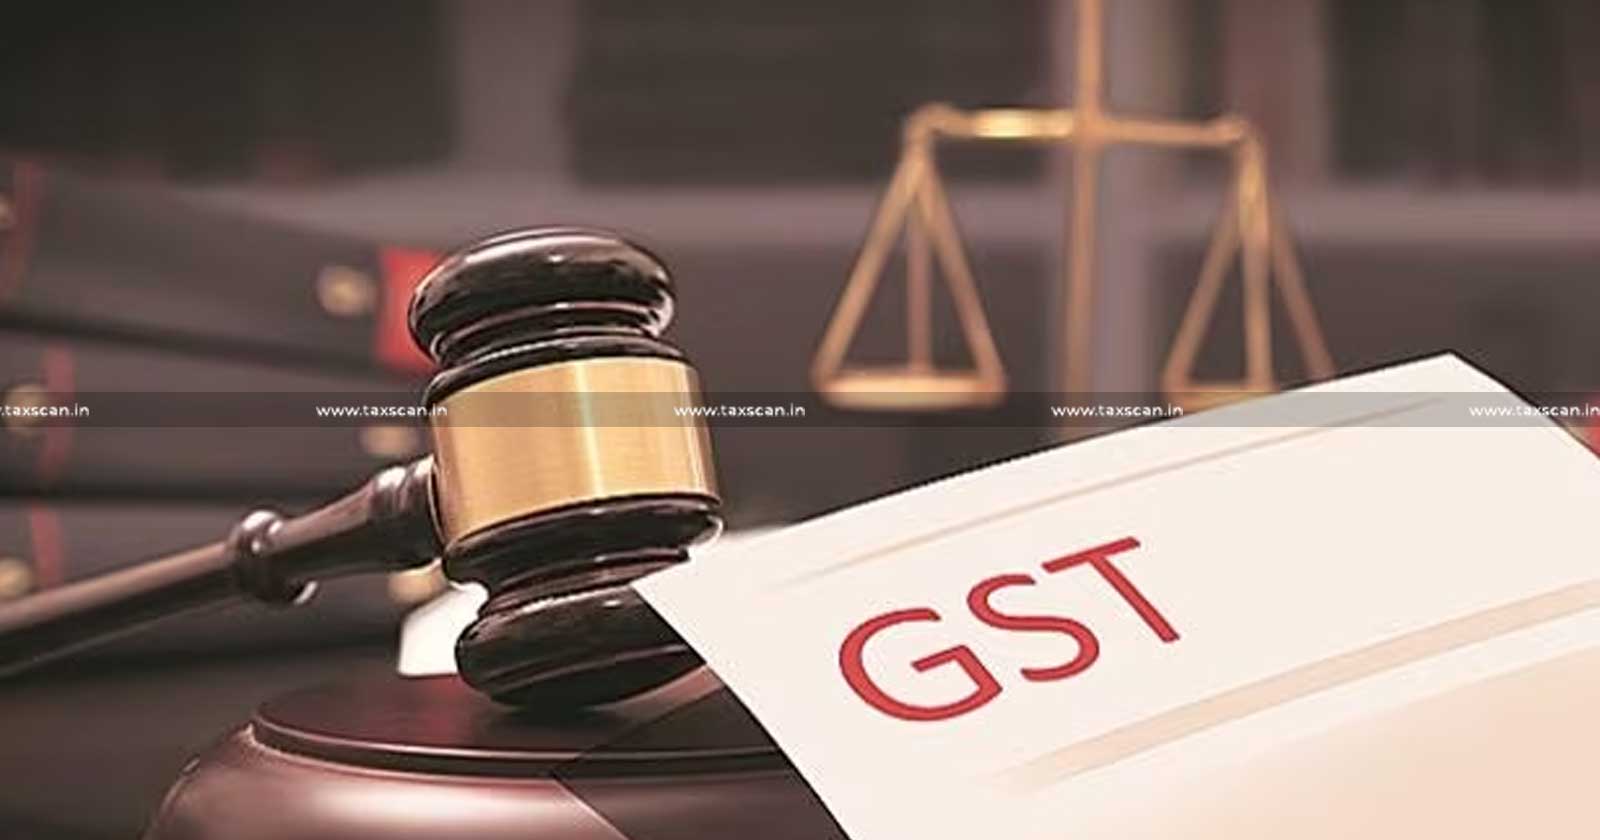 Kerala's Disappointment - Union - Finance Ministry - Allocates - GST Appellate Tribunal Bench - Contrary - Promises - taxscan